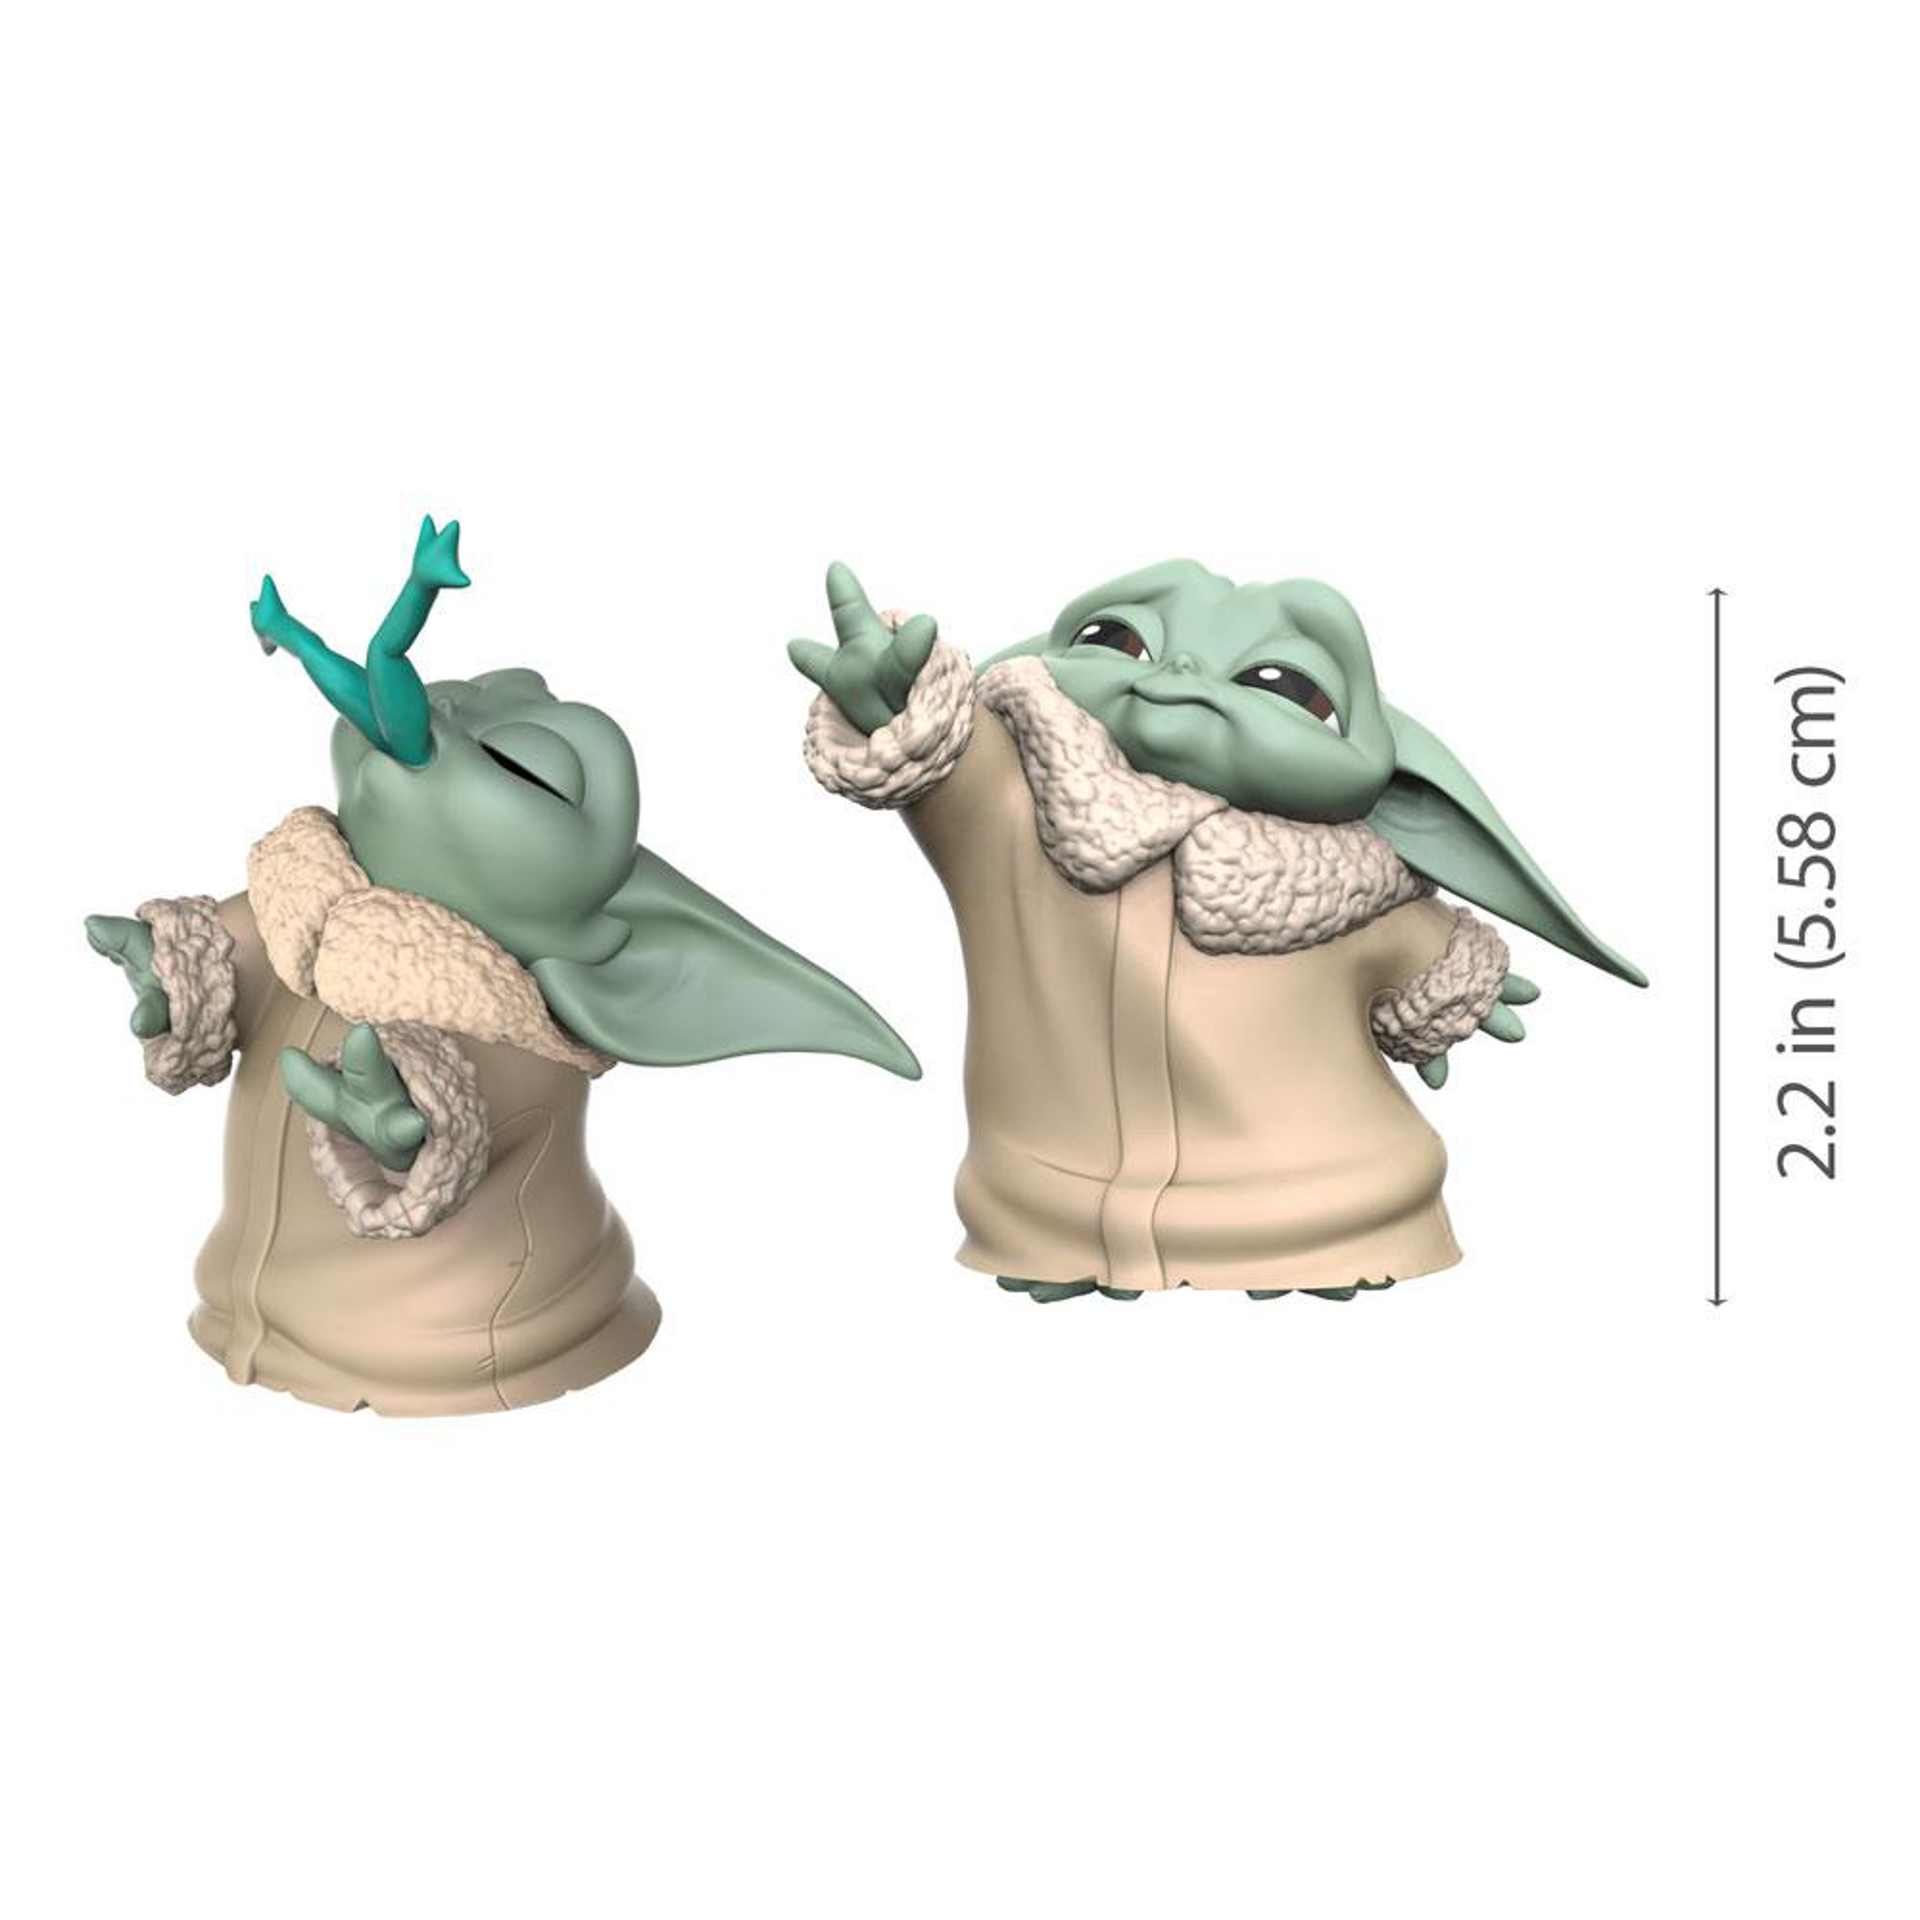 § Star Wars Mandalorian - The Child Froggy Snack and Force Moment 2 Figures Pack